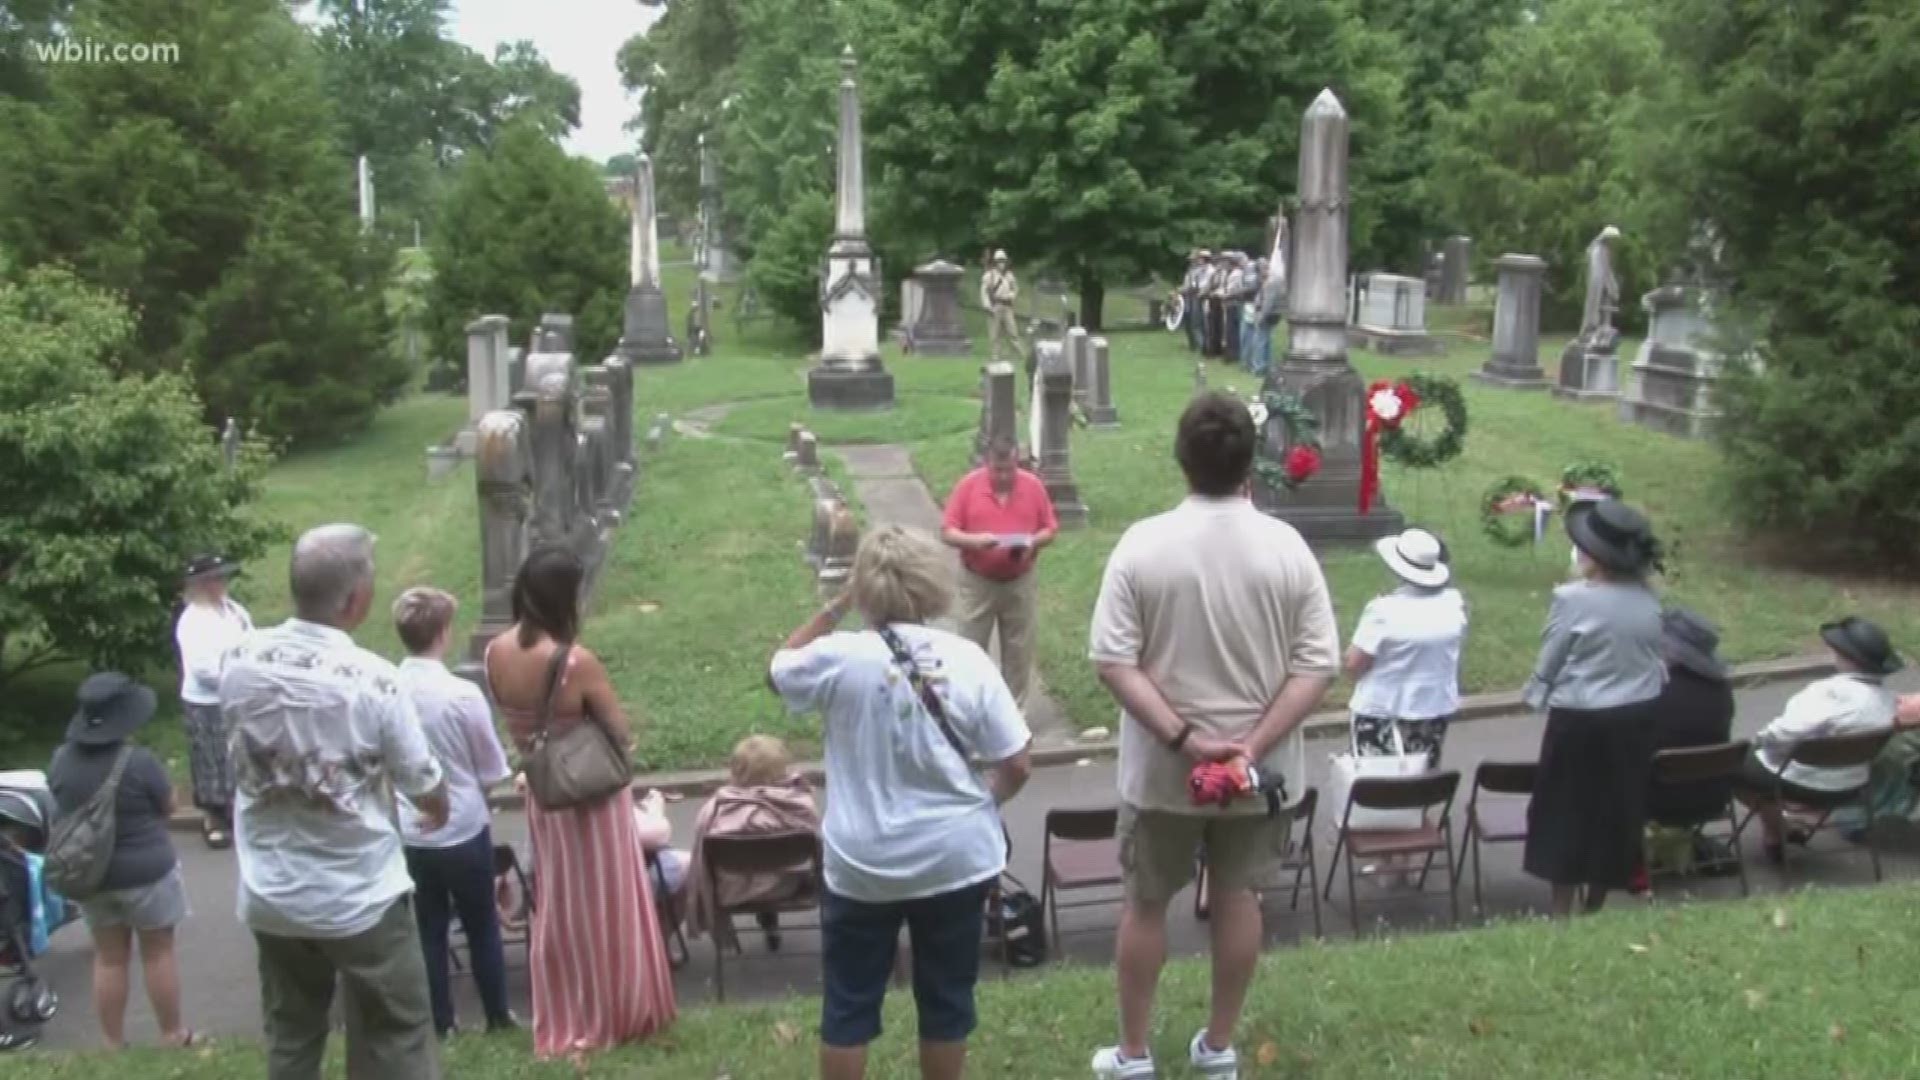 Visual Storyteller Jake Albright takes us to a wreath laying ceremony where they honored their family member, Pleasant Miller McClung.